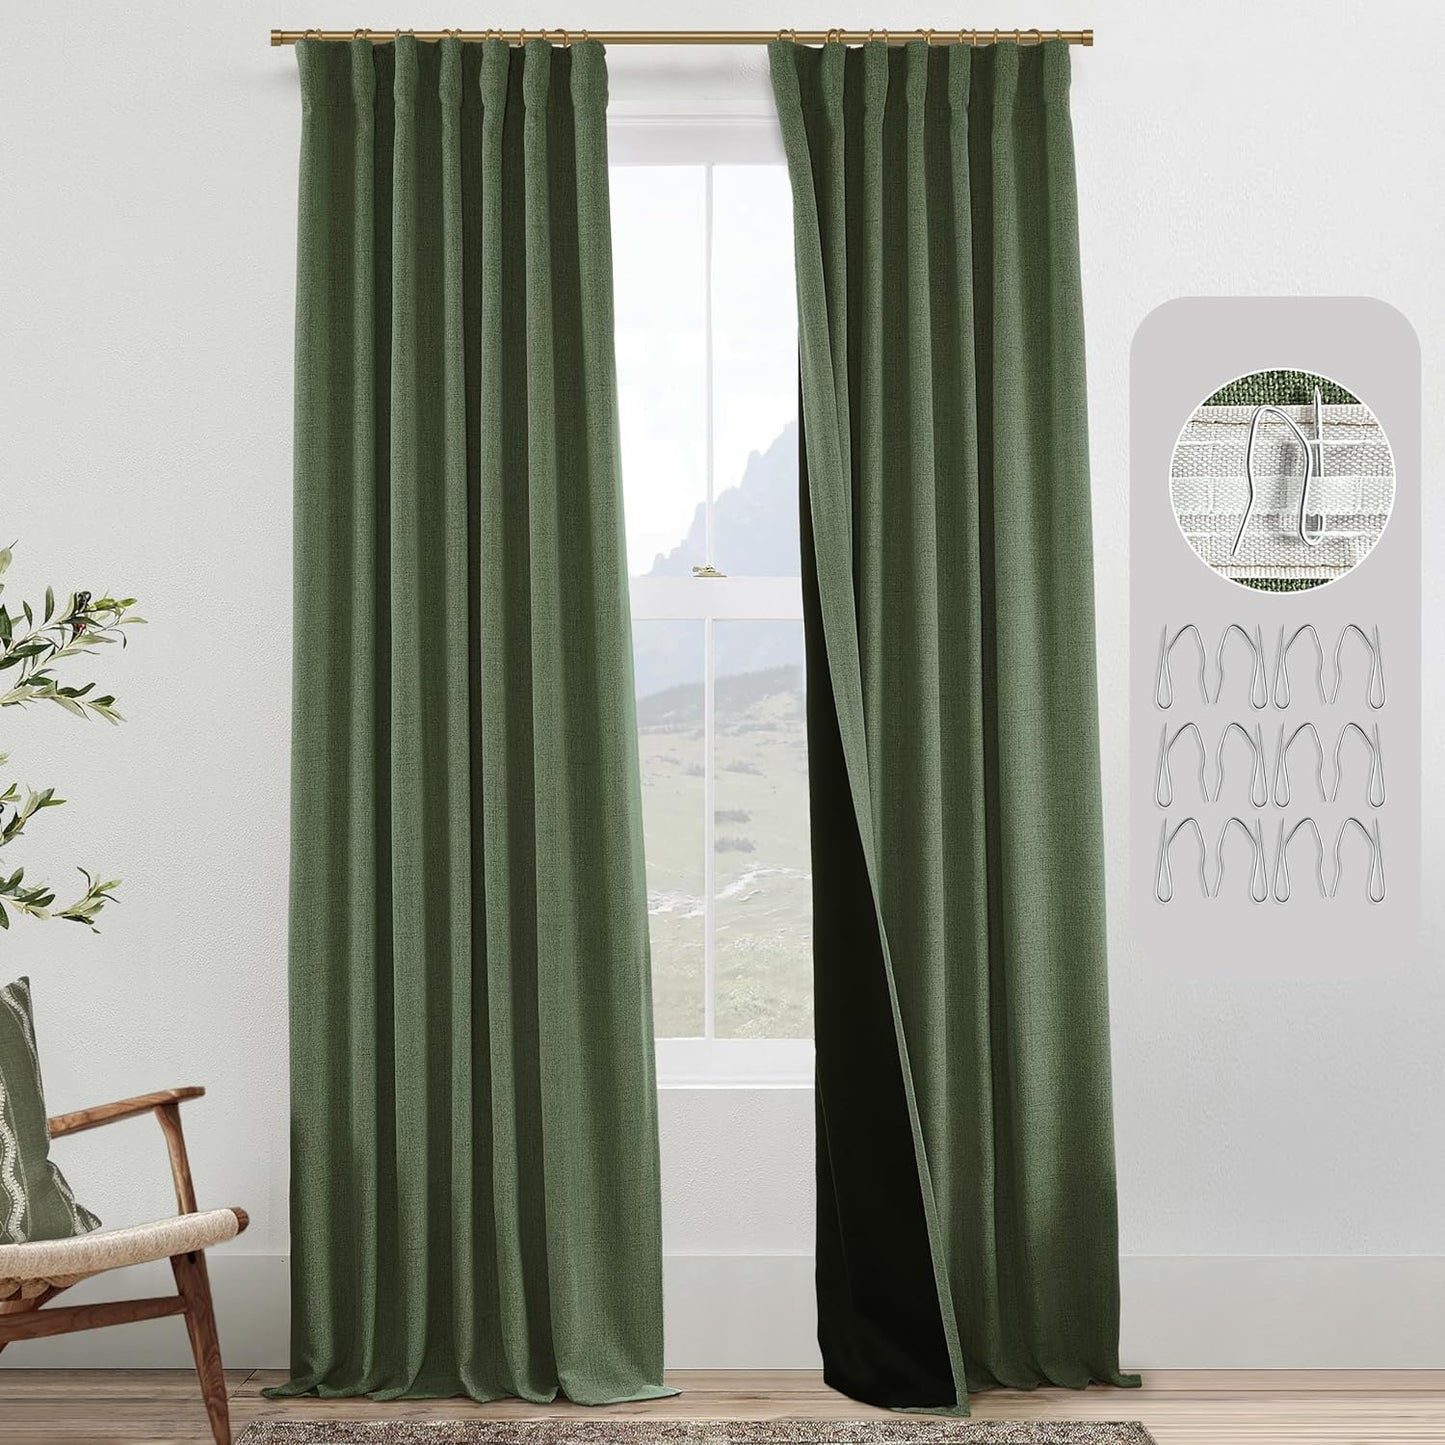 Sage Green Blackout Curtains 84 Inch Length 2 Panels Set for Bedroom Linen Aesthetic Boho Greyish Light Green Window Room Darkening Curtains for Living Room Kids Boys Room,Back Tab Pleated,84 in Long  PANELSBURG Olive Green 50"W X 102"L 